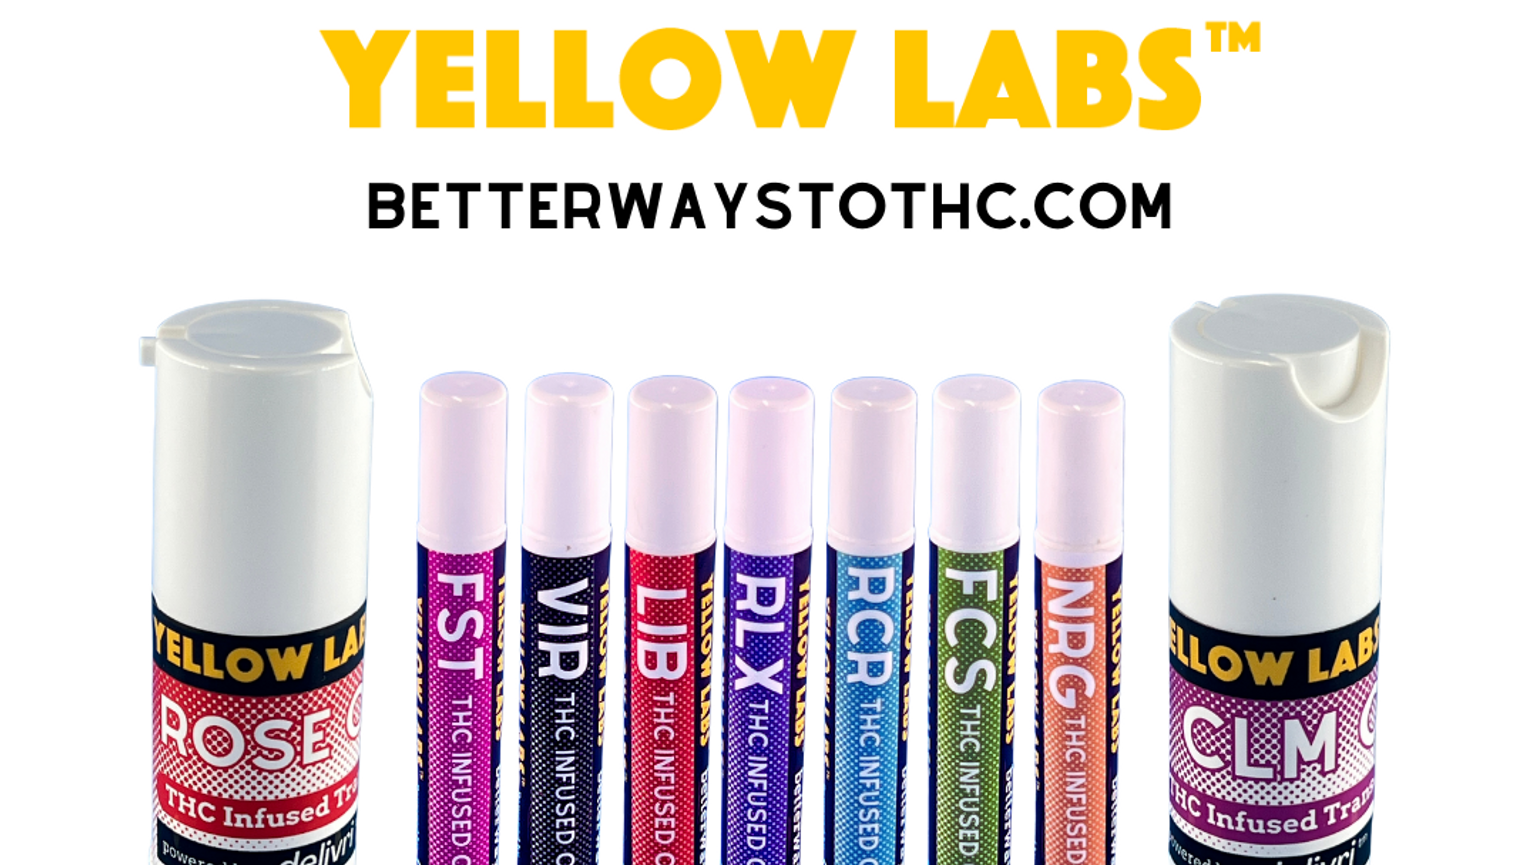 Yellow Labs Next Generation Products